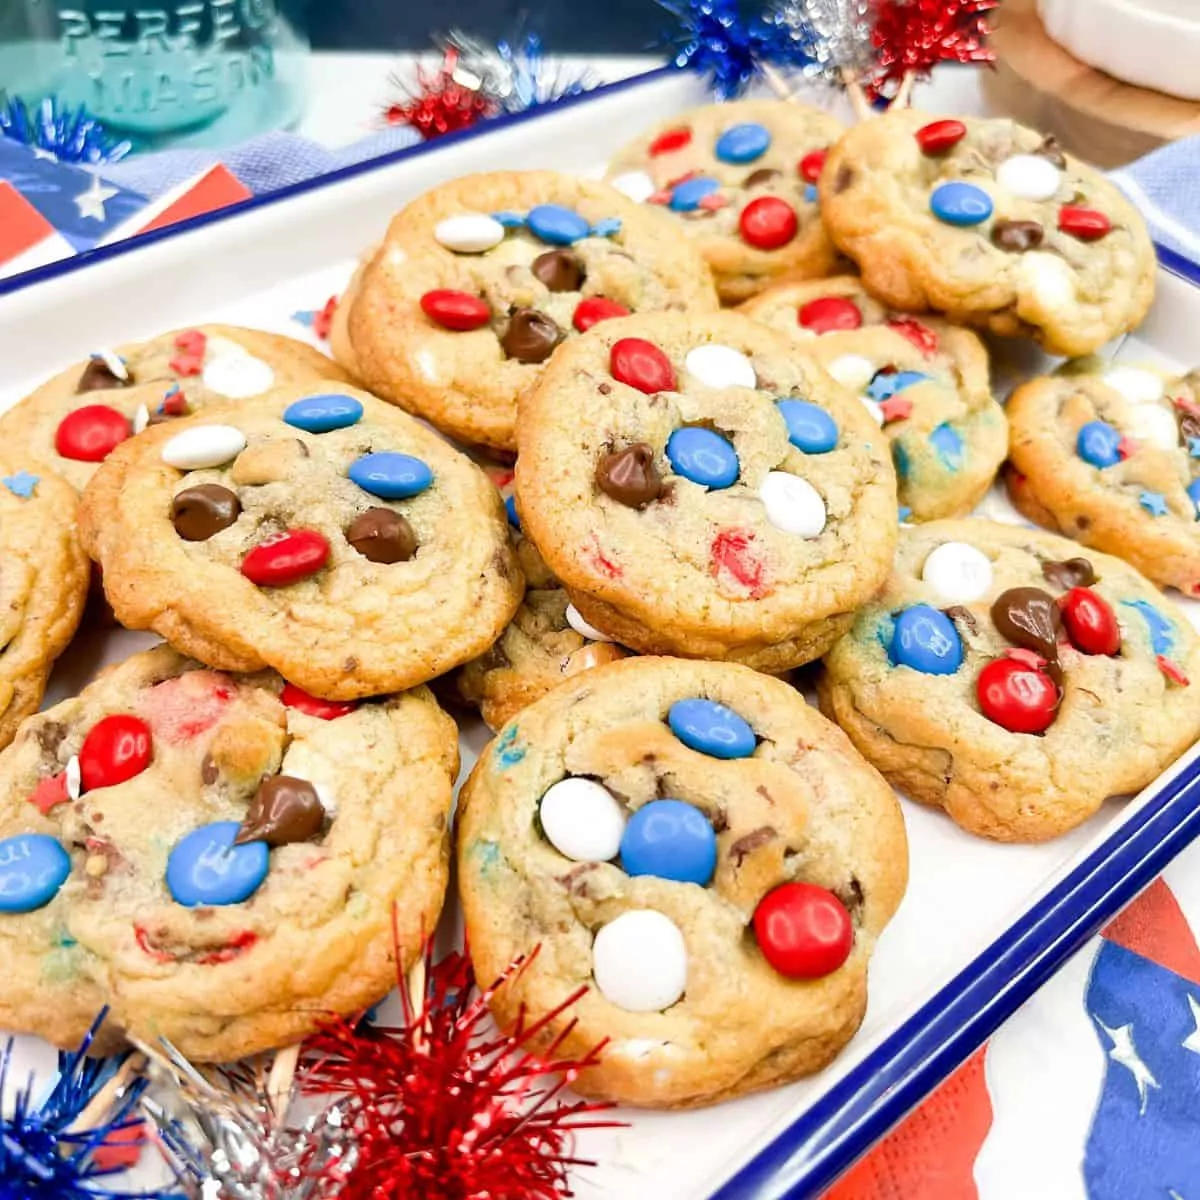 chocolate chip cookies with red, white and blue m&ms on white tray.